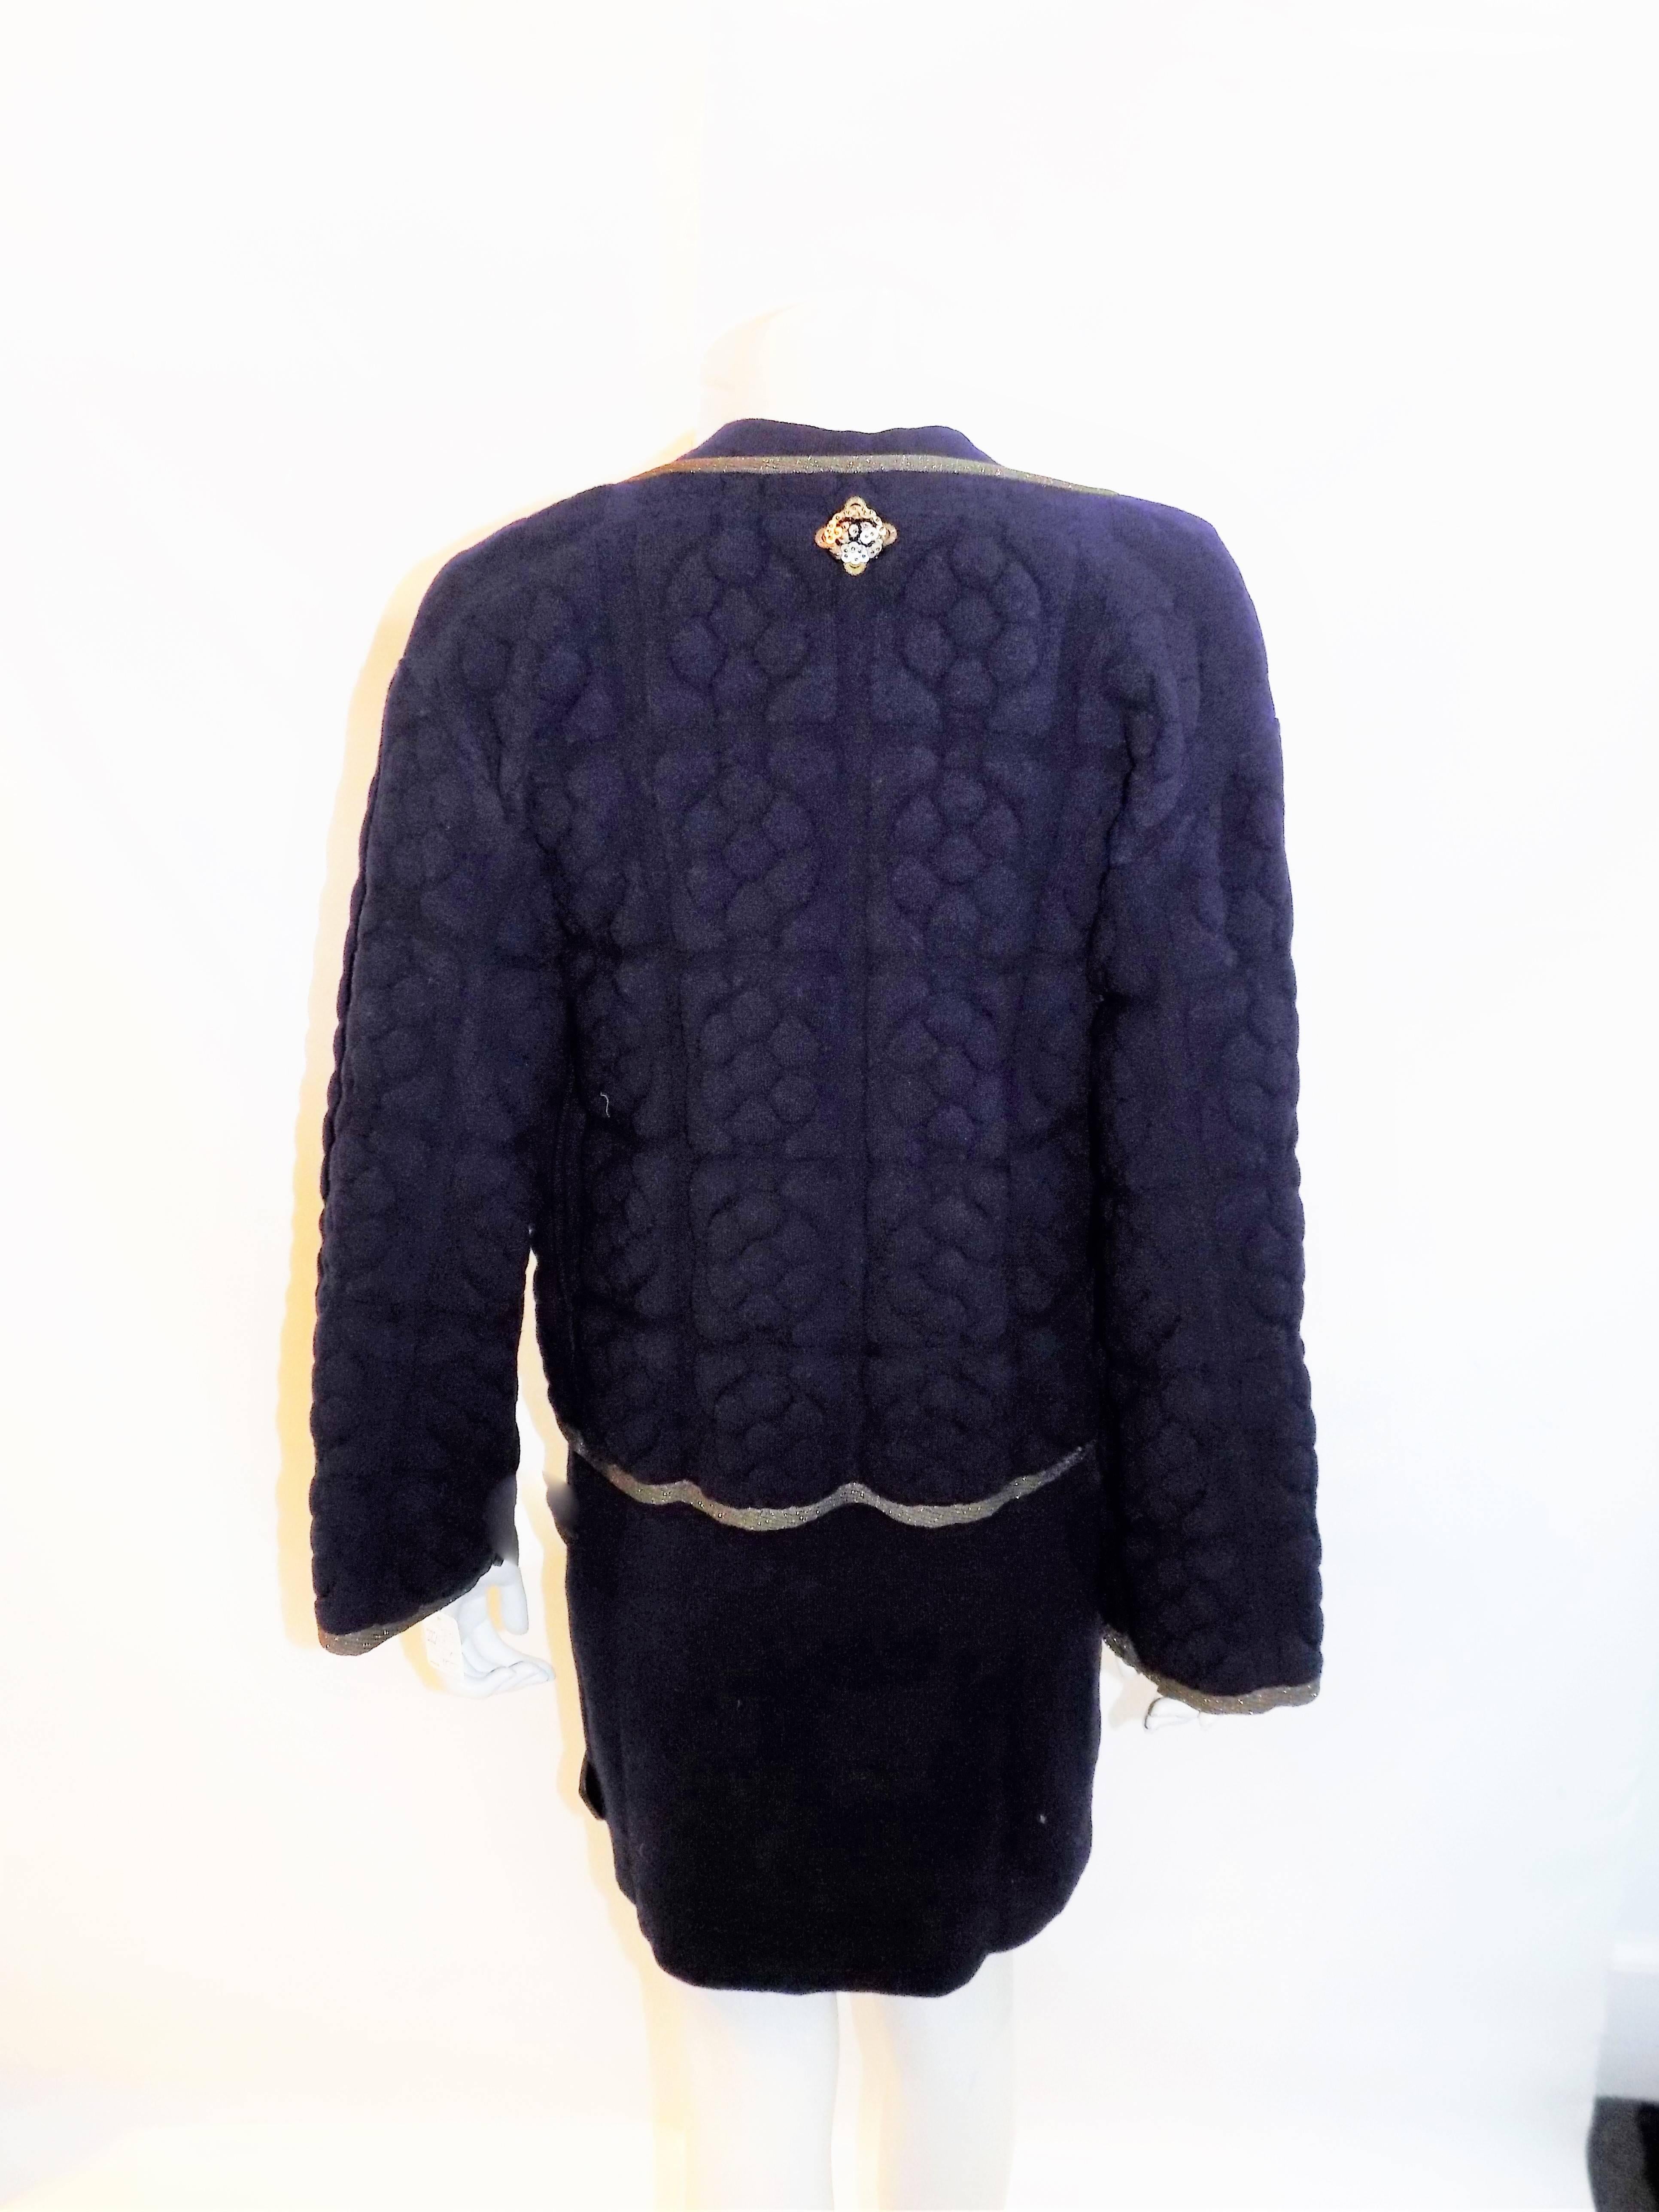 Chanel raise/ quilted knit navy dress and jacket with Lesage patch 1